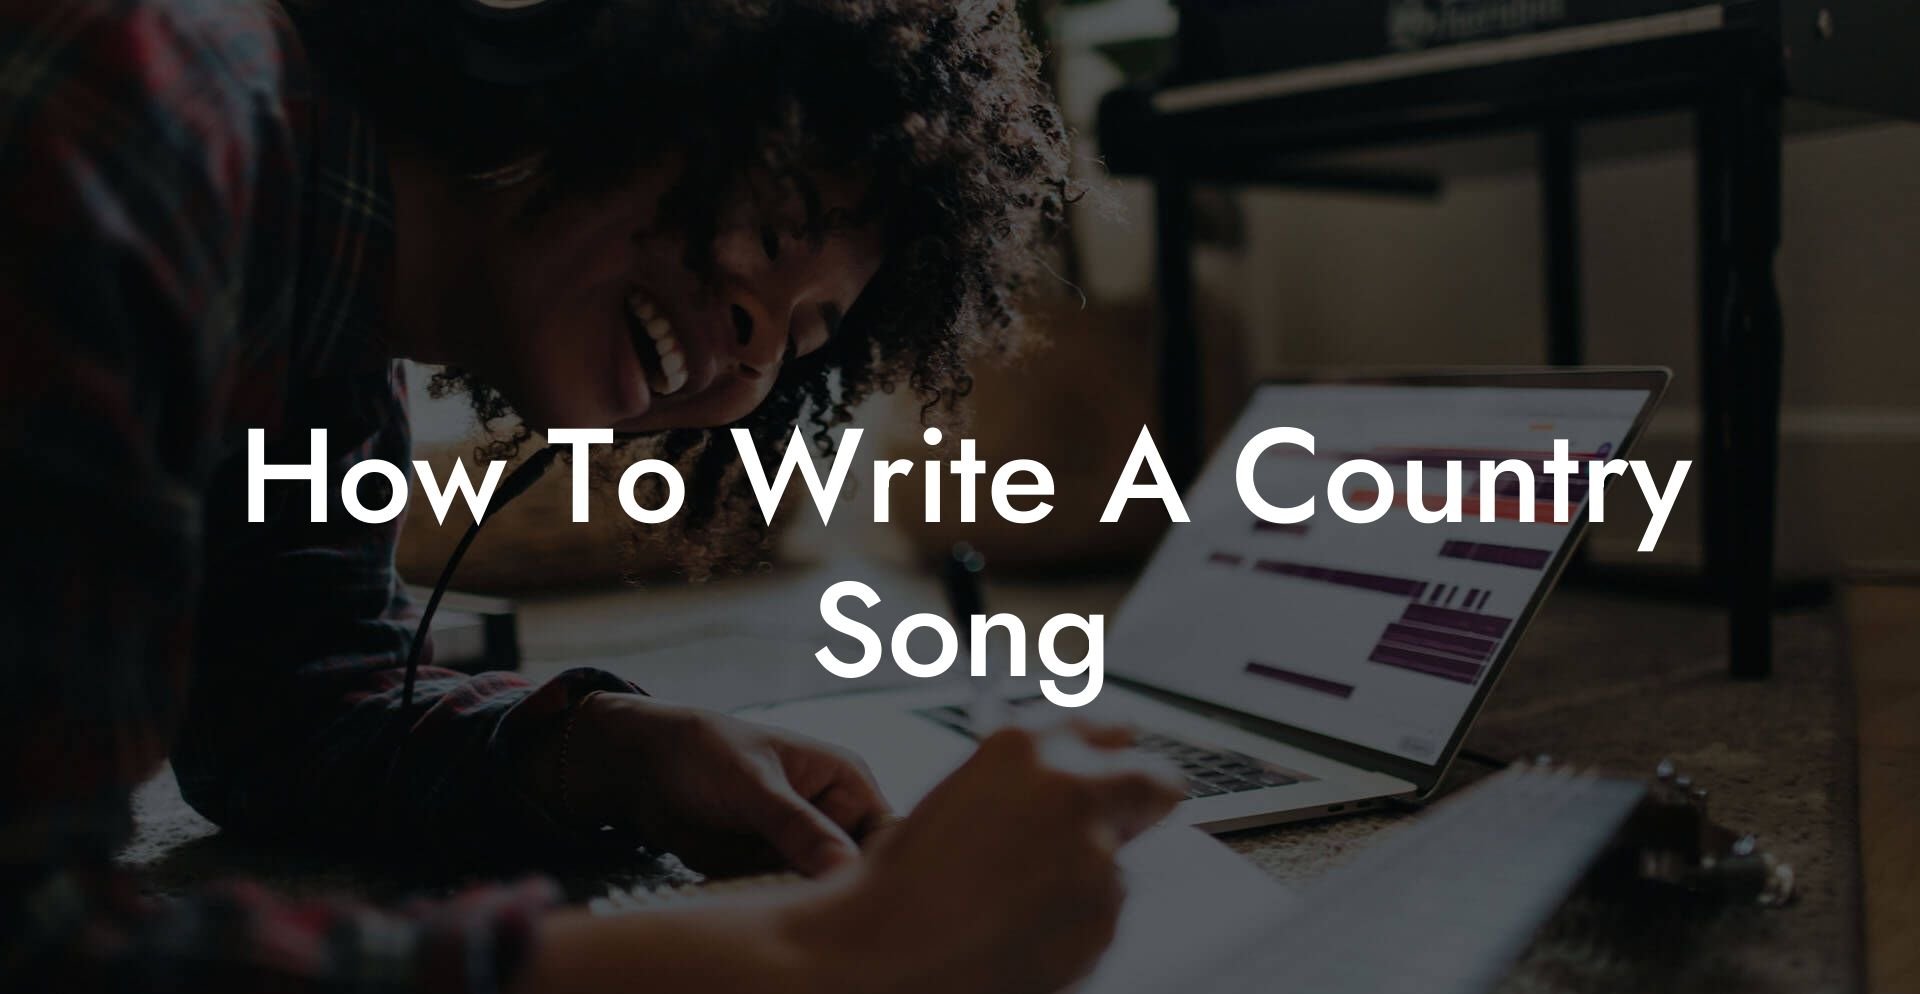 how to write a country song lyric assistant